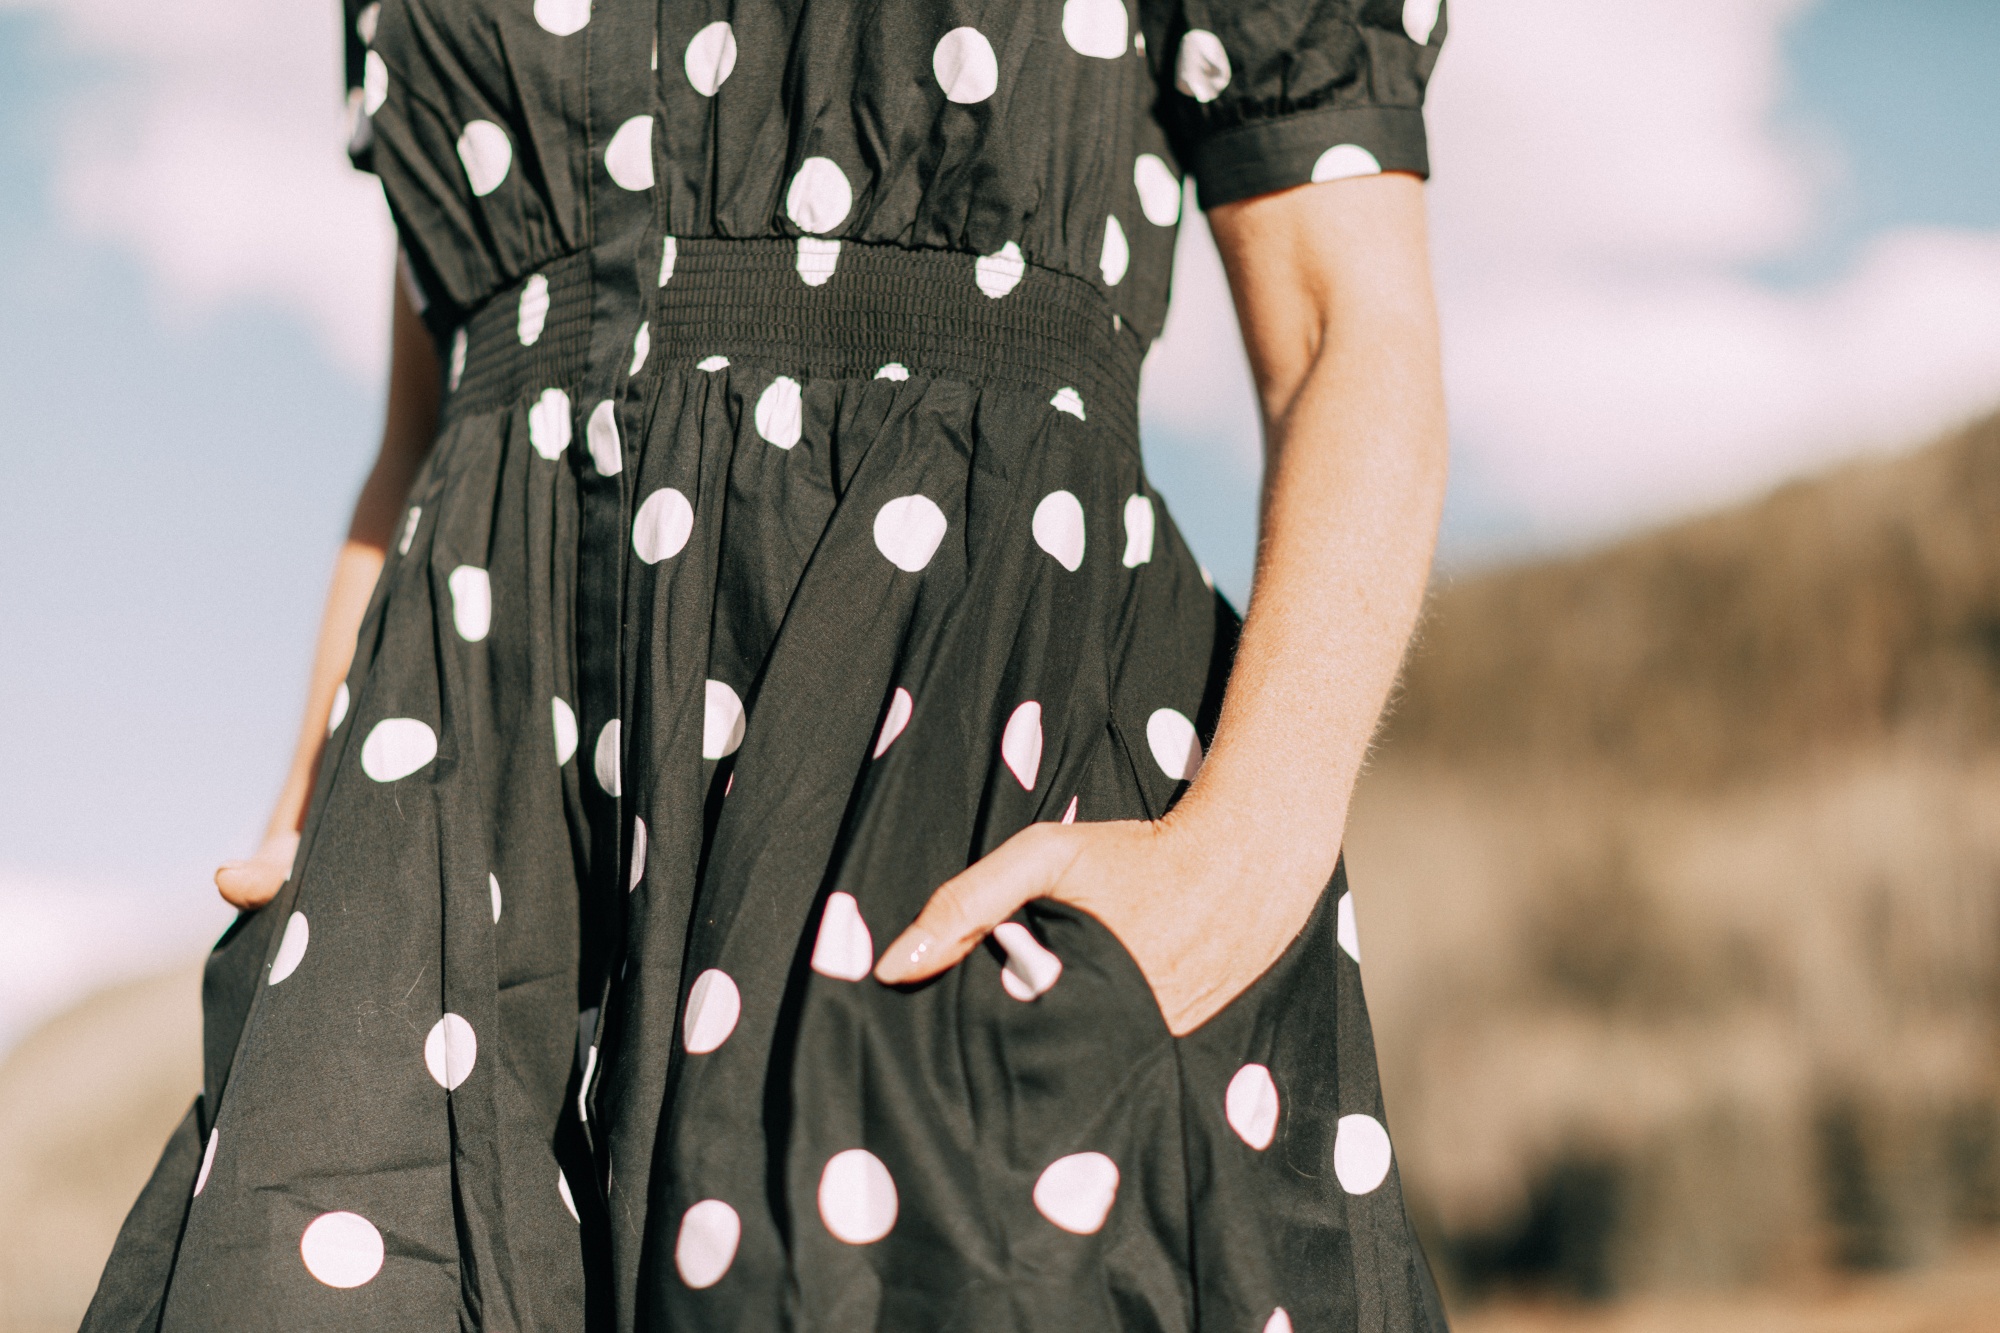 Affordable Summer Dresses, Fashion blogger Erin Busbee of BusbeeStyle.com wearing a black and white polka dot dress by Worthington from JCPenney with white Liz Claiborne sling back mules in Telluride, CO